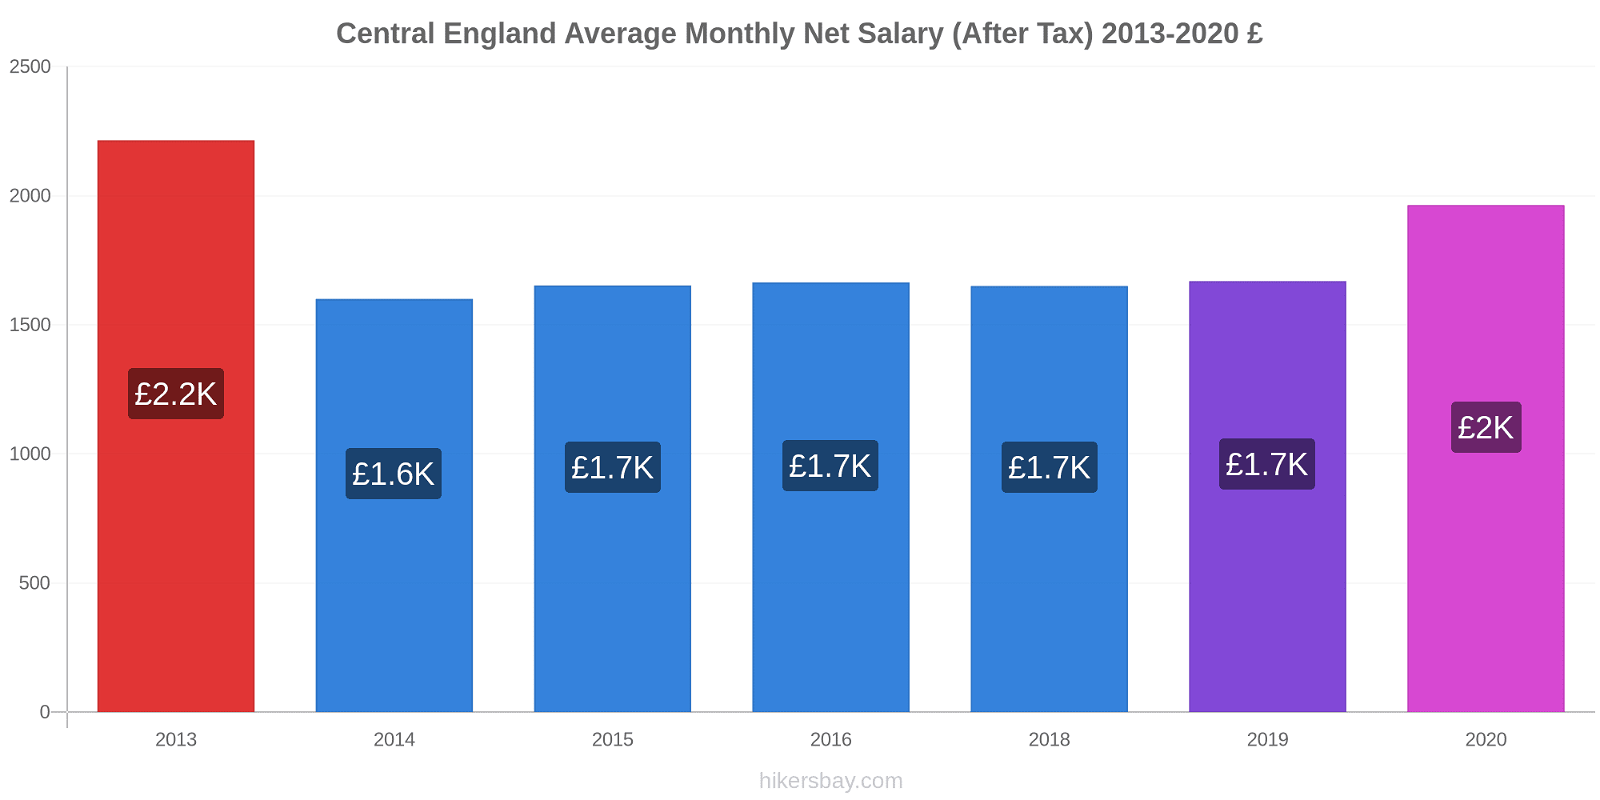 Central England price changes Average Monthly Net Salary (After Tax) hikersbay.com